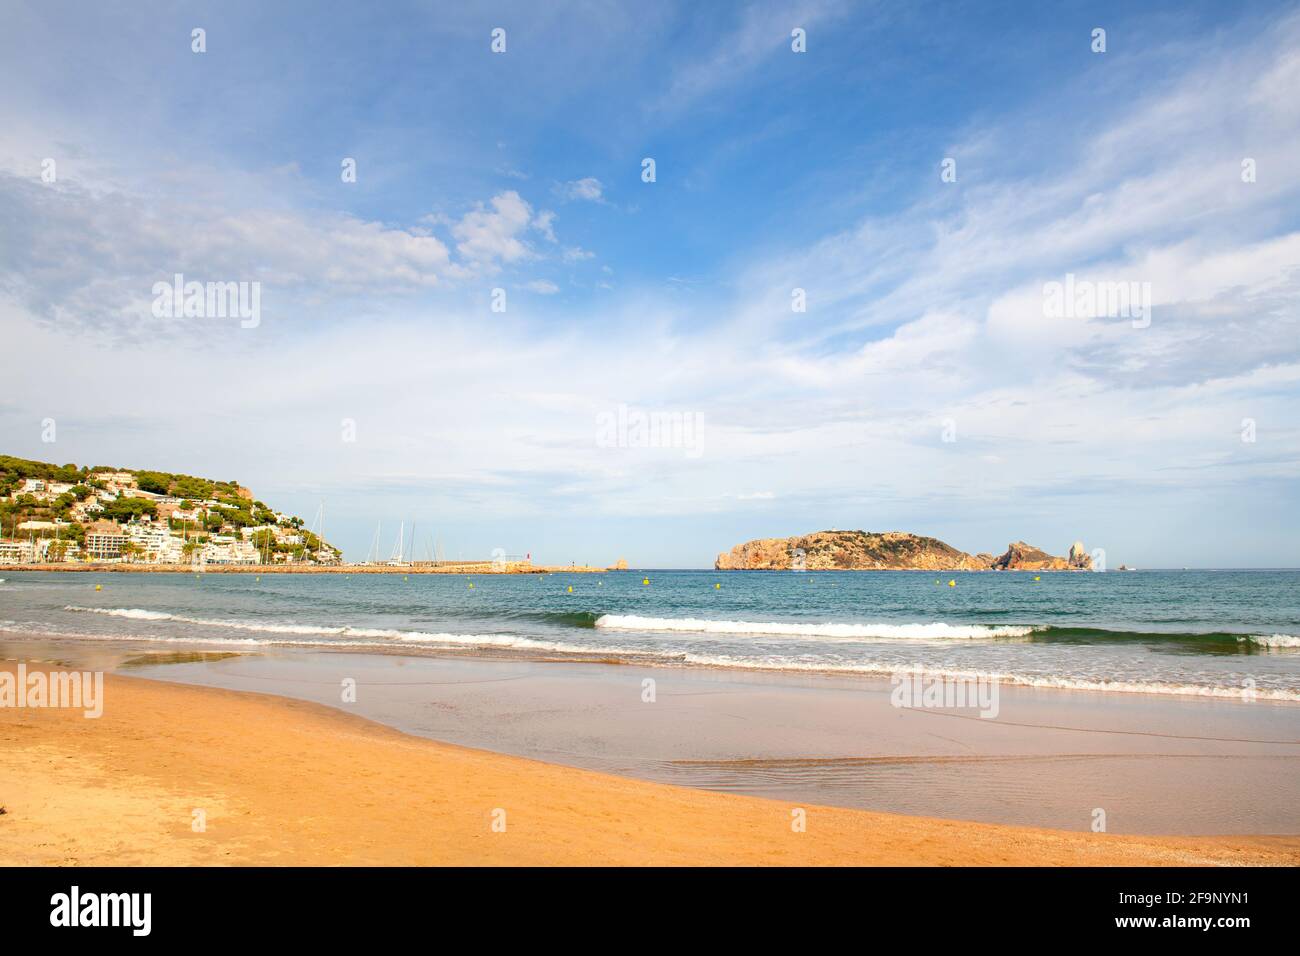 Coast with islands and harbor in Estartit Spain Stock Photo